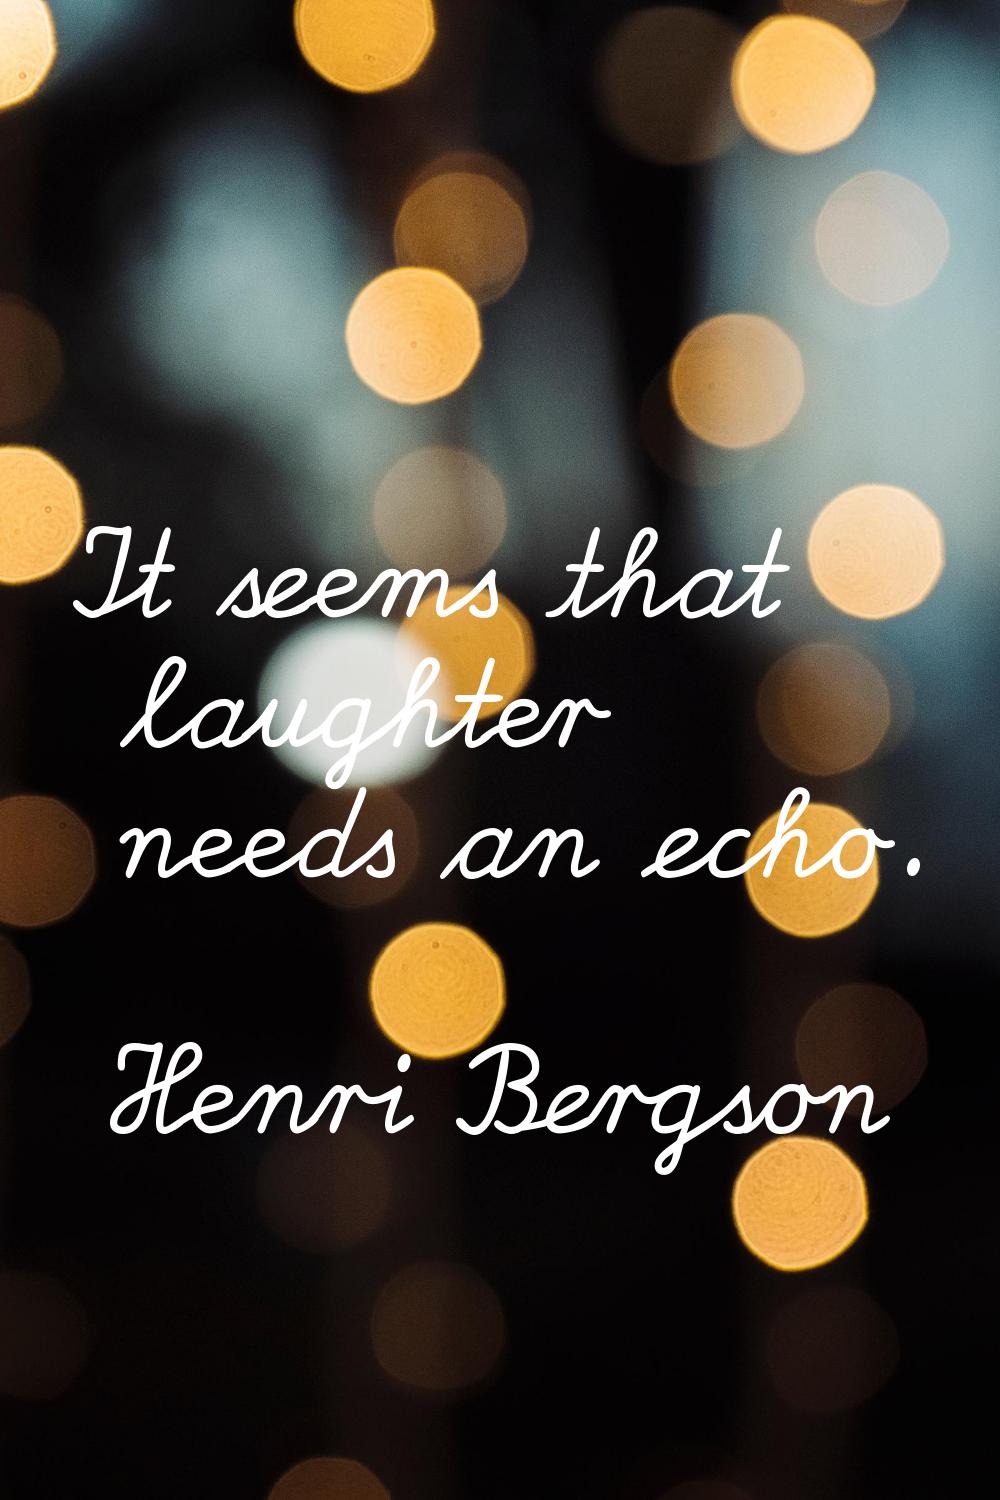 It seems that laughter needs an echo.